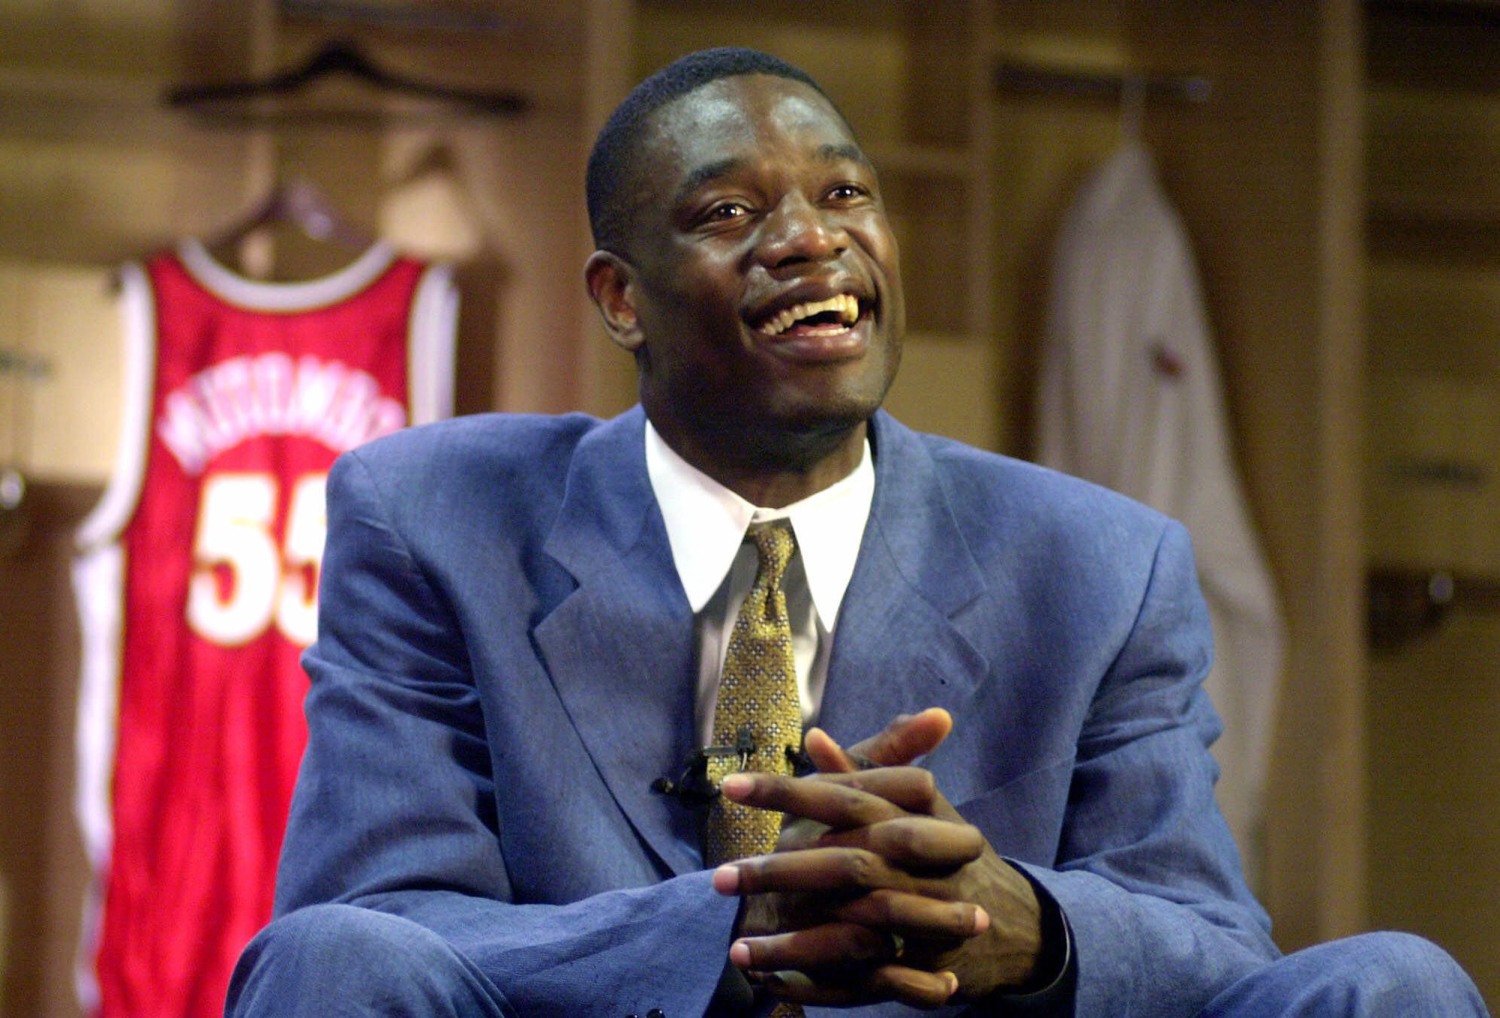 Who is Dikembe Mutombo's wife Rose?